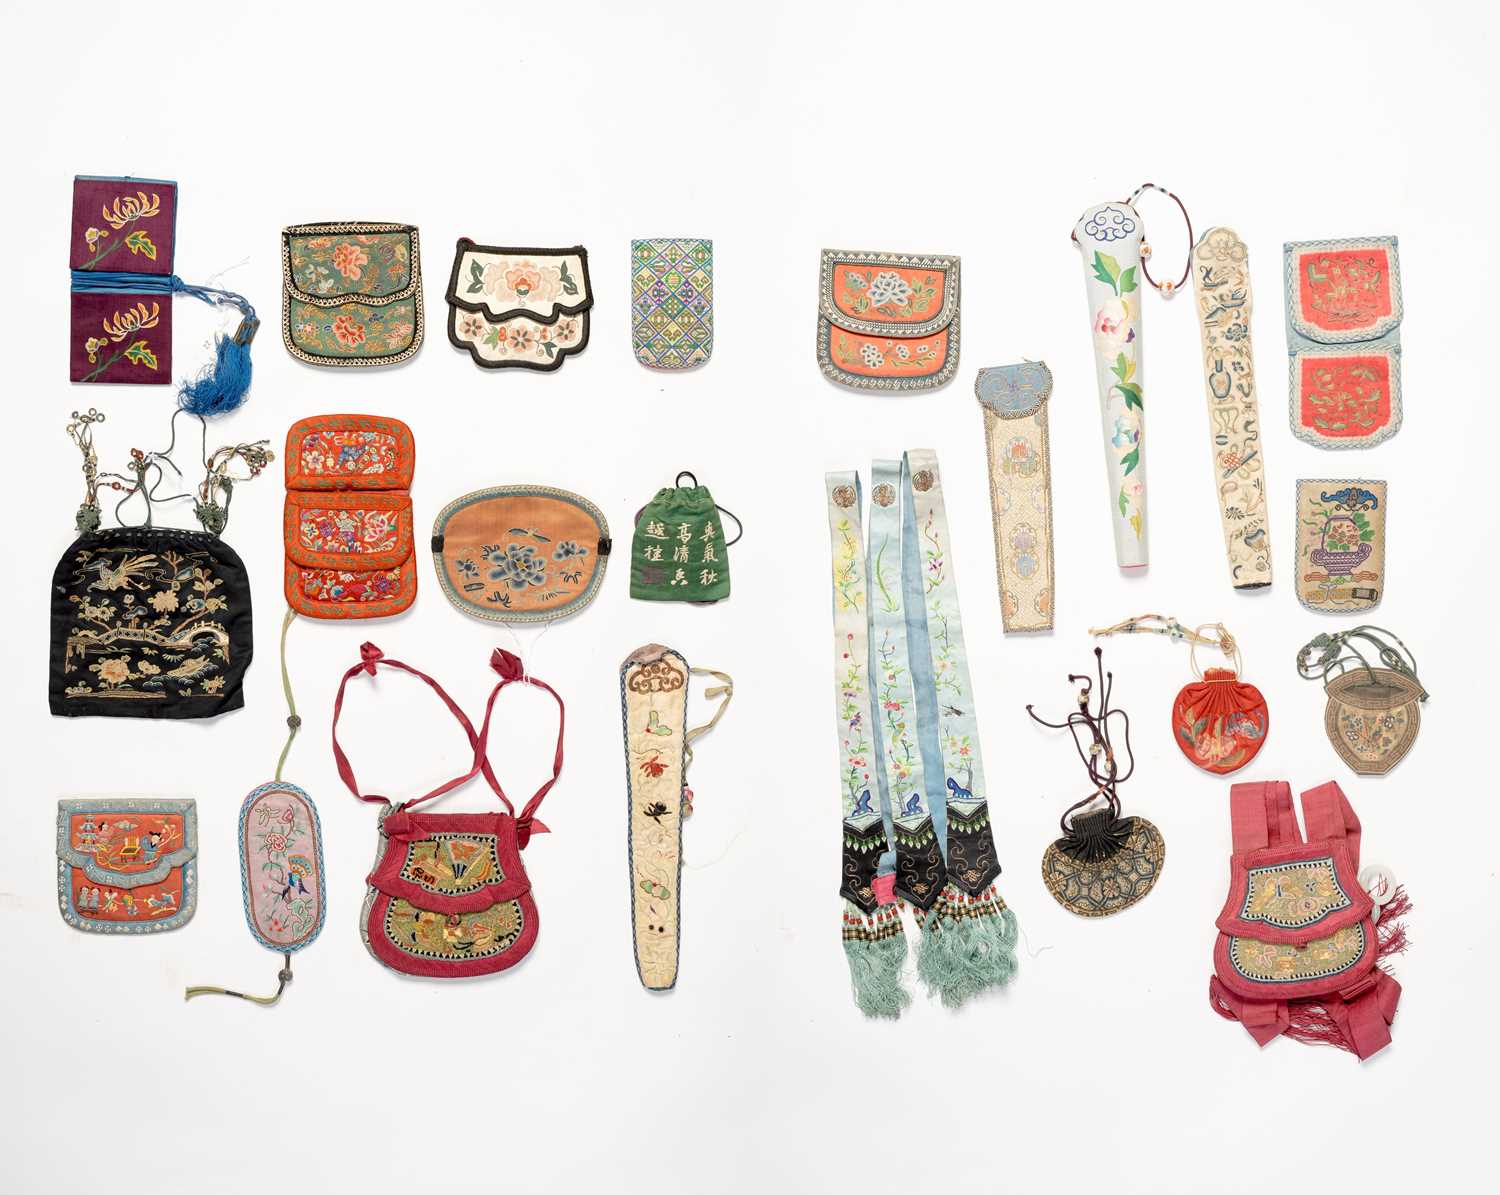 NO RESERVE A COLLECTION OF CHINESE TEXTILES QING DYNASTY Including purses, fan cases, sashes and